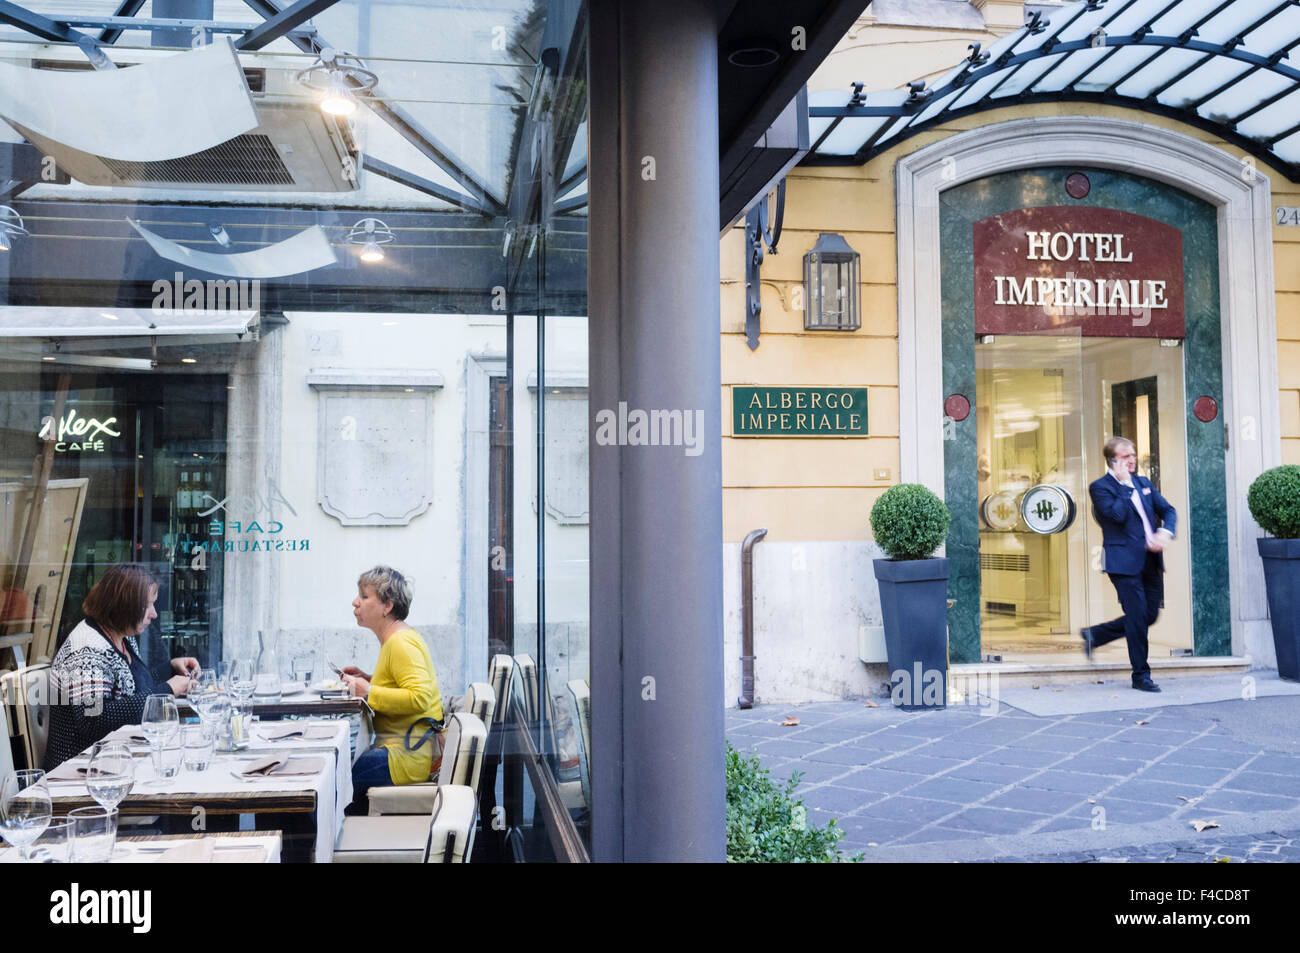 People at elegant outdoor restaurant next to the Hotel Imperiale in Via Veneto, Rome, Italy Stock Photo